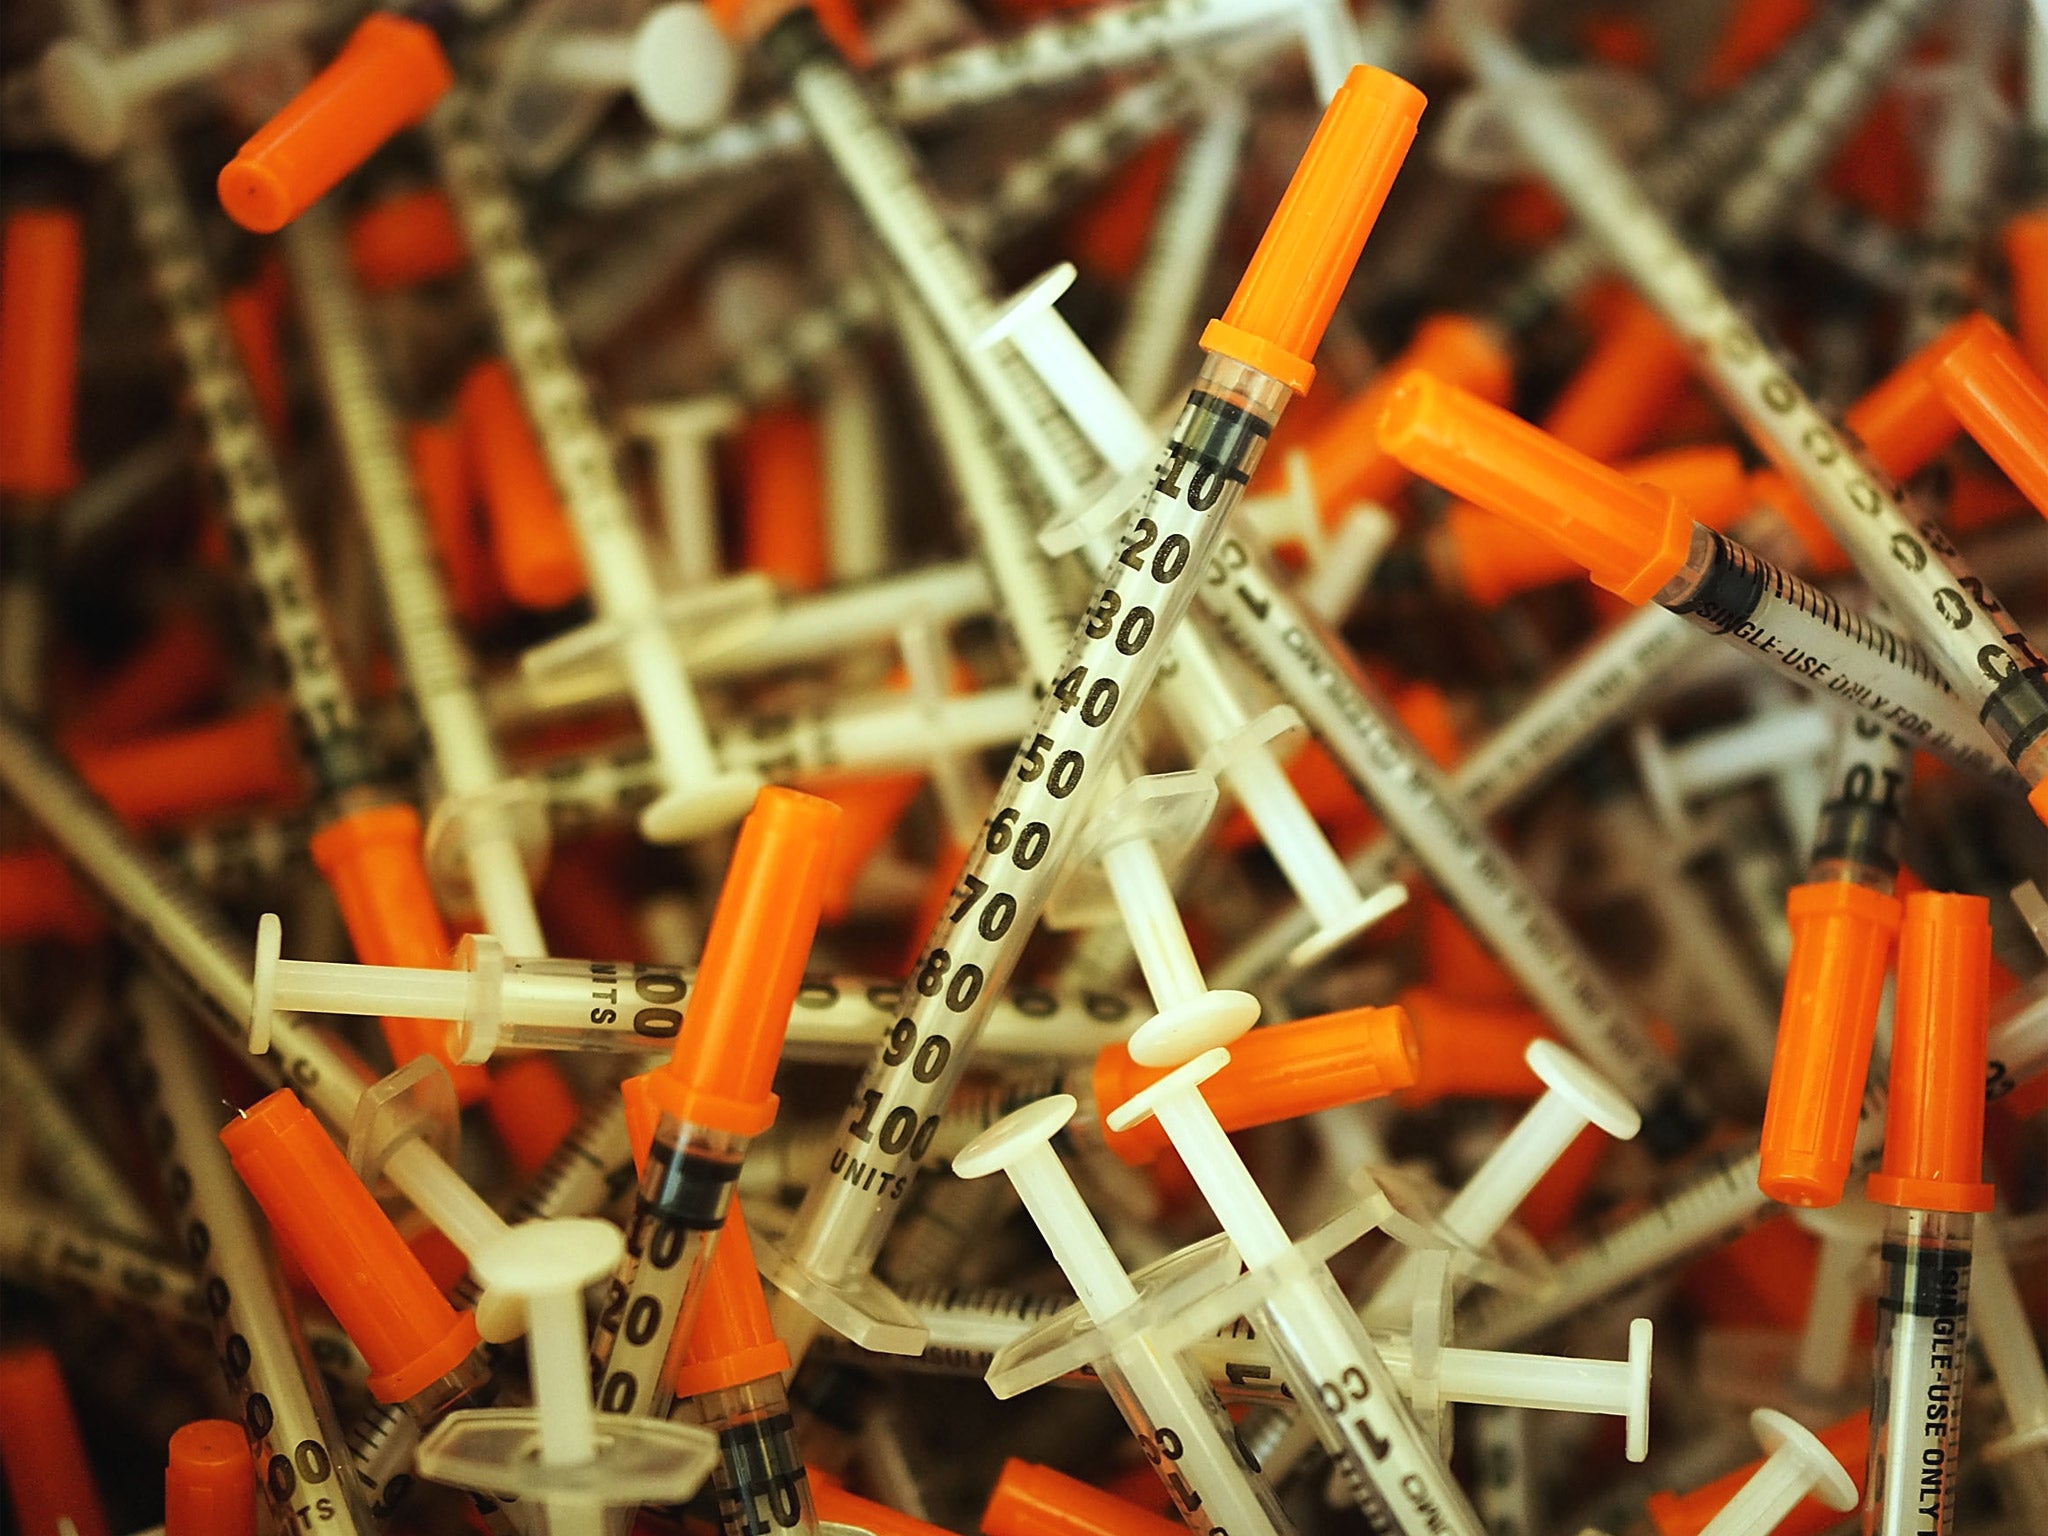 Discarded syringes at a needle exchange clinic